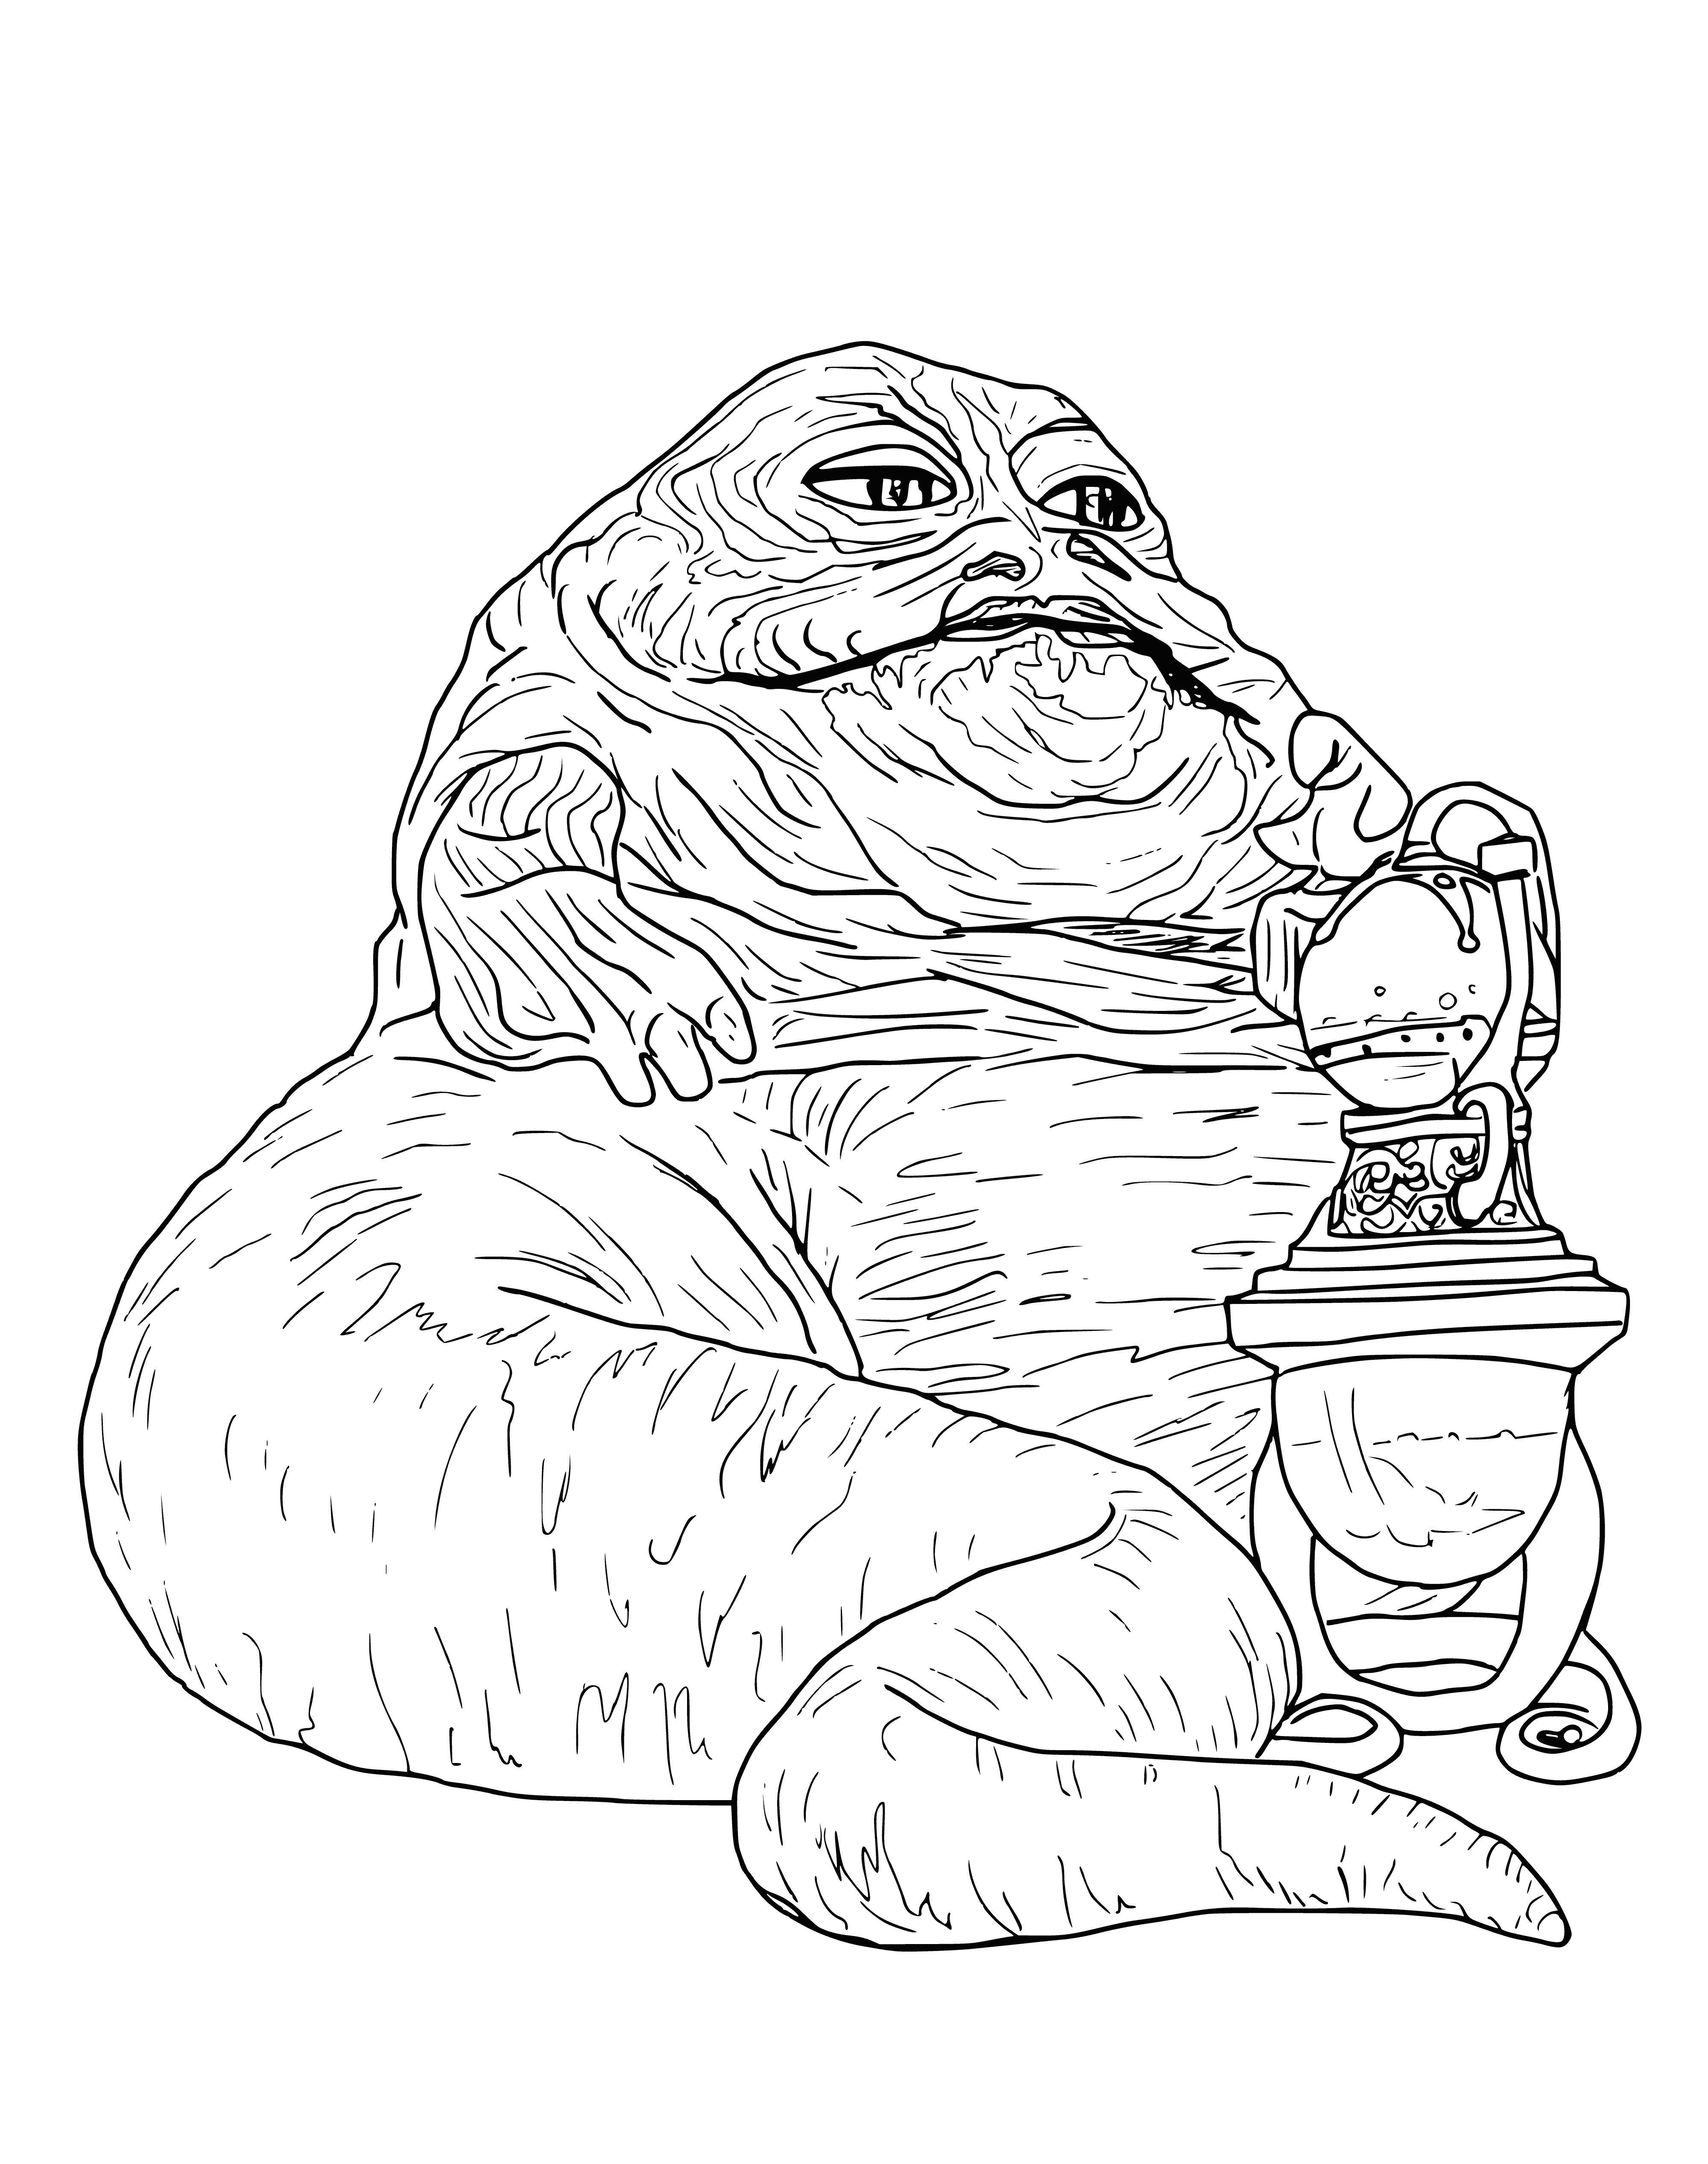 The head of the smugglers Jabba the Hutt coloring page